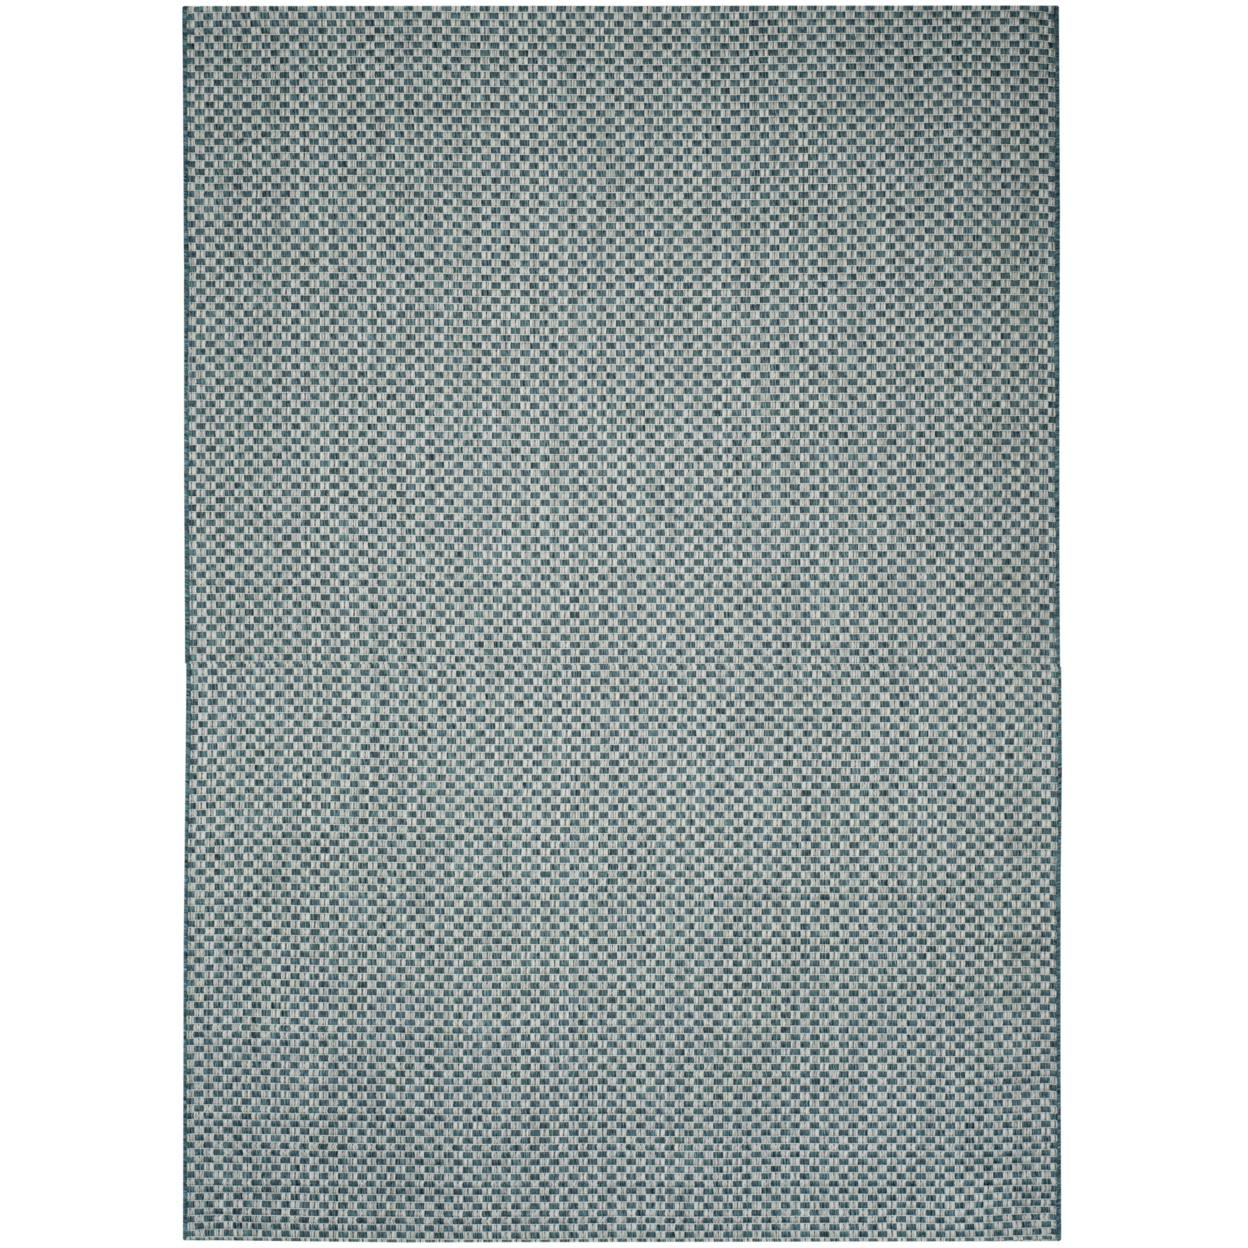 SAFAVIEH Outdoor CY8653-37221 Courtyard Turquoise / Light Grey Rug - 9' X 9' Square